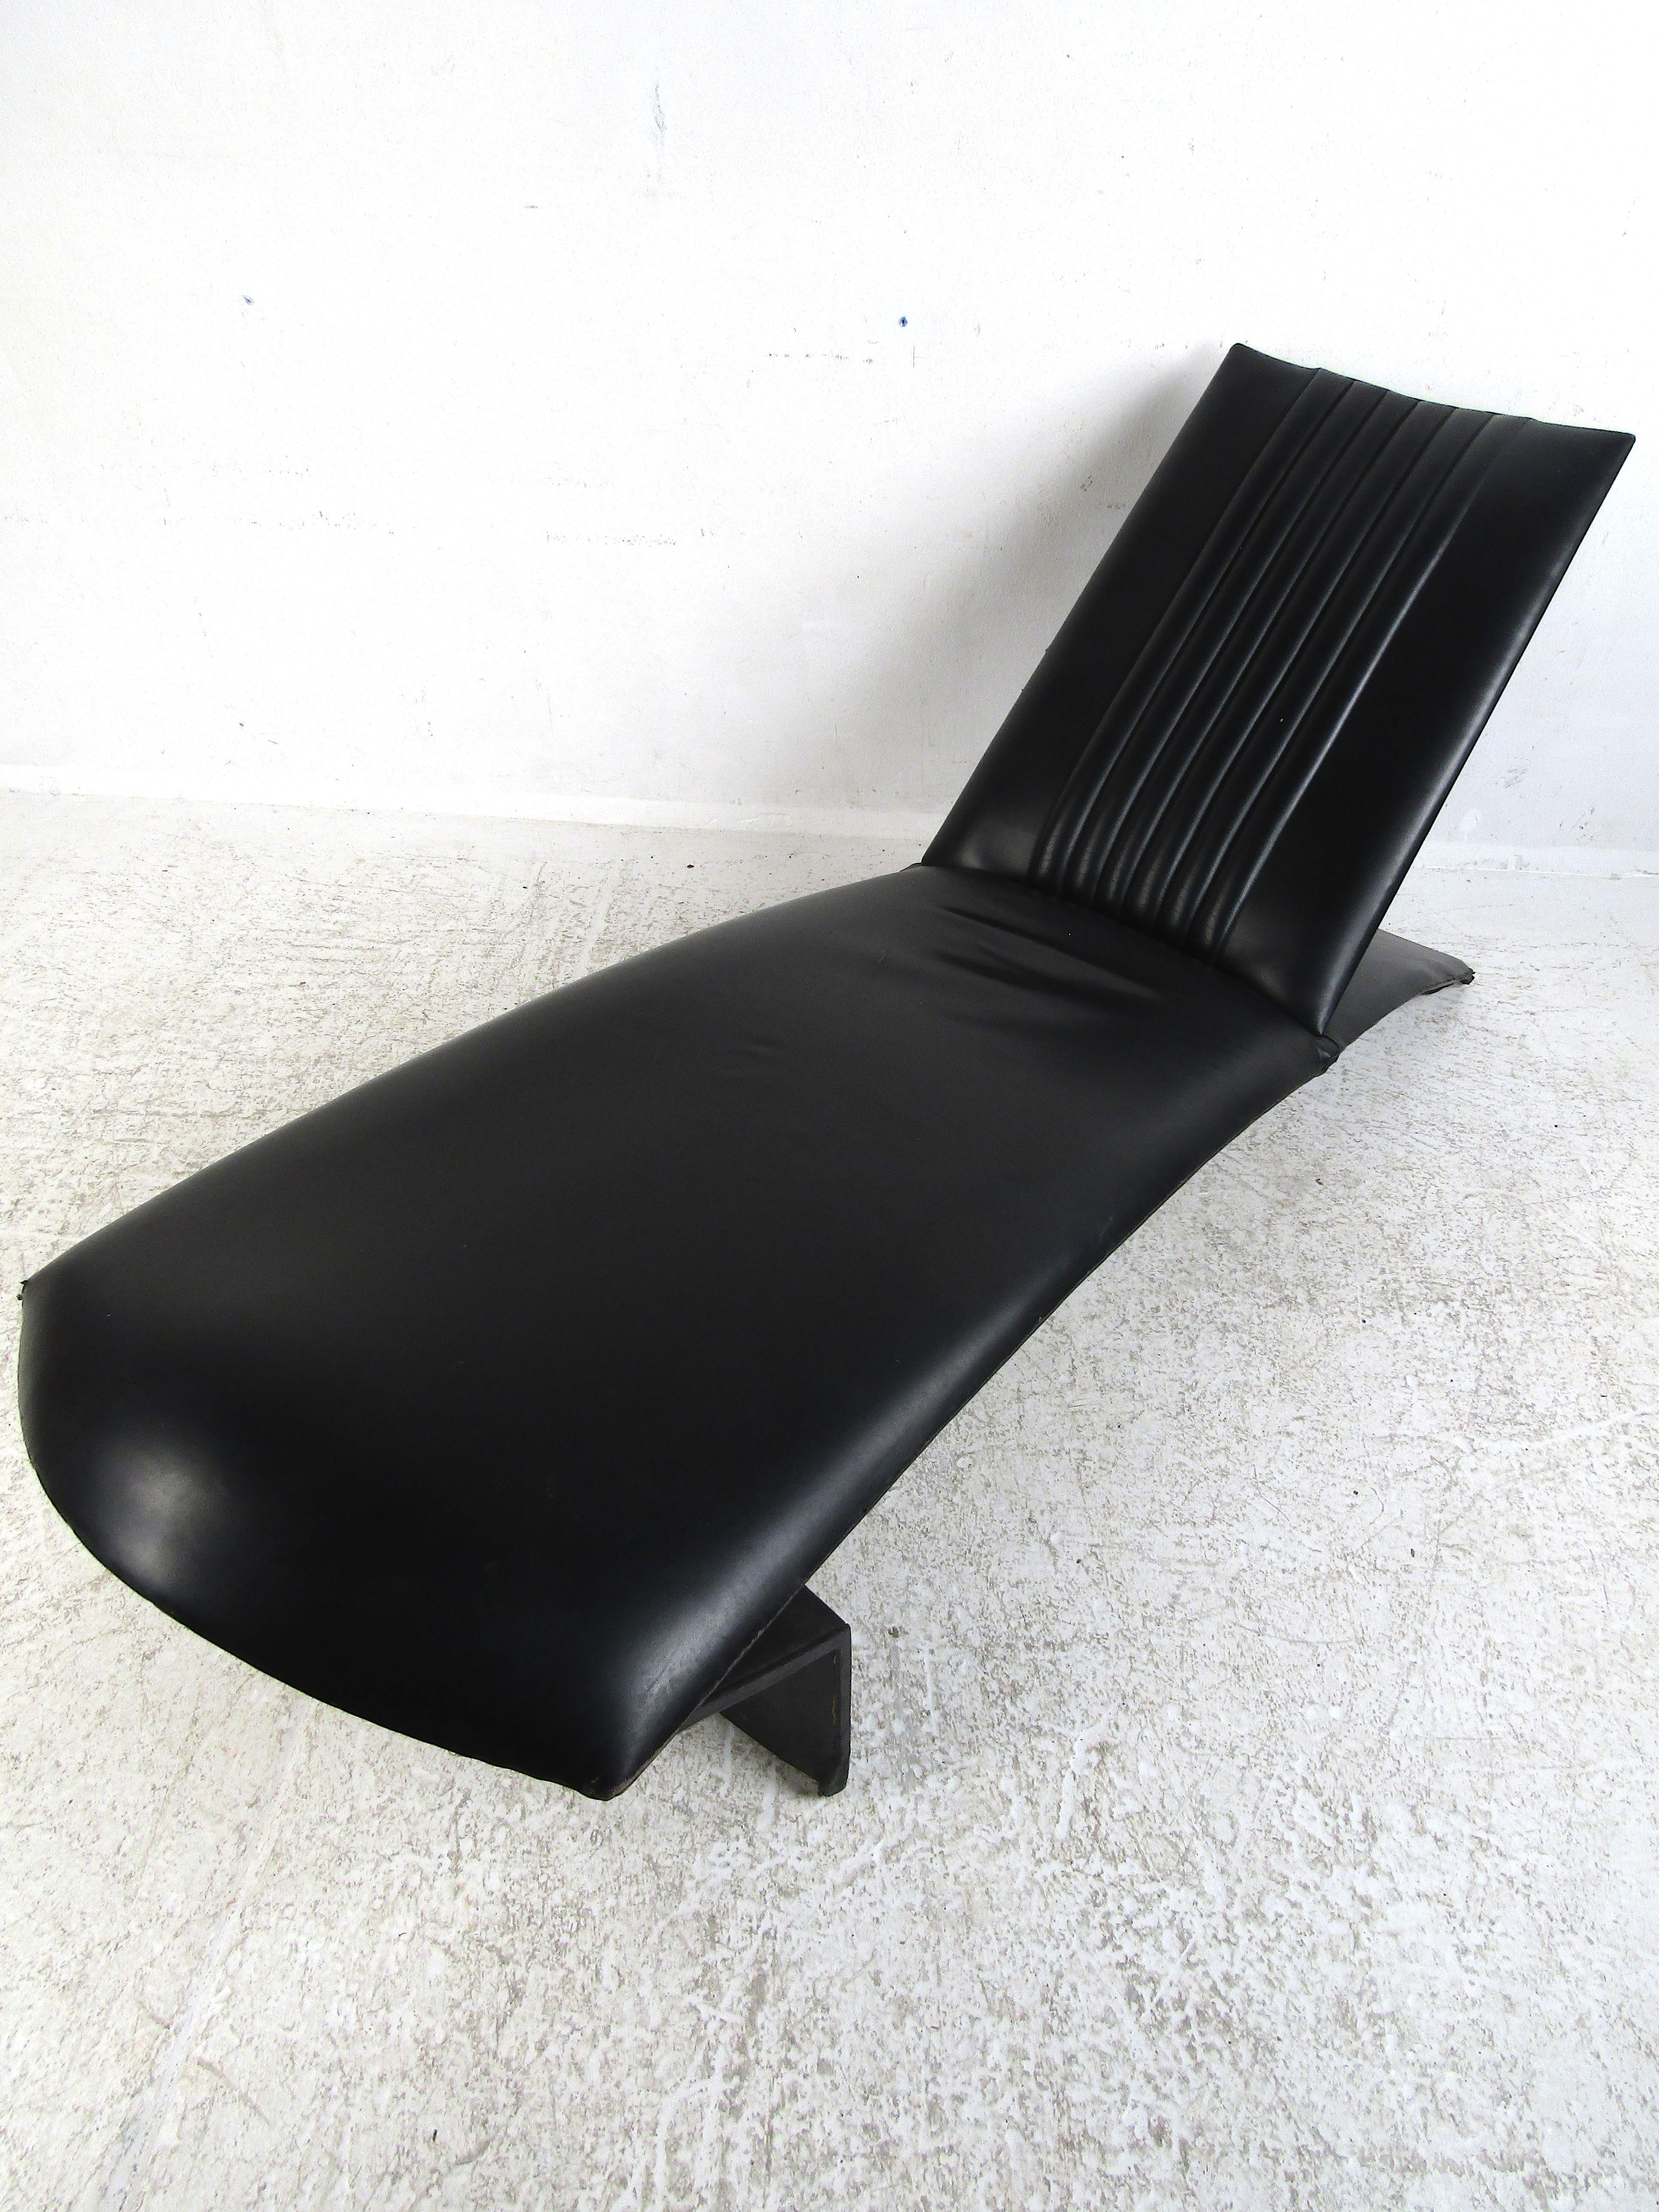 Unique Mid-Century Modern Italian vinyl chaise lounge. Striking angular design with a sloped backrest and form-fitting bed area. Vertical accents on the backrest's upholstery. Please confirm item location with dealer (NJ or NY).